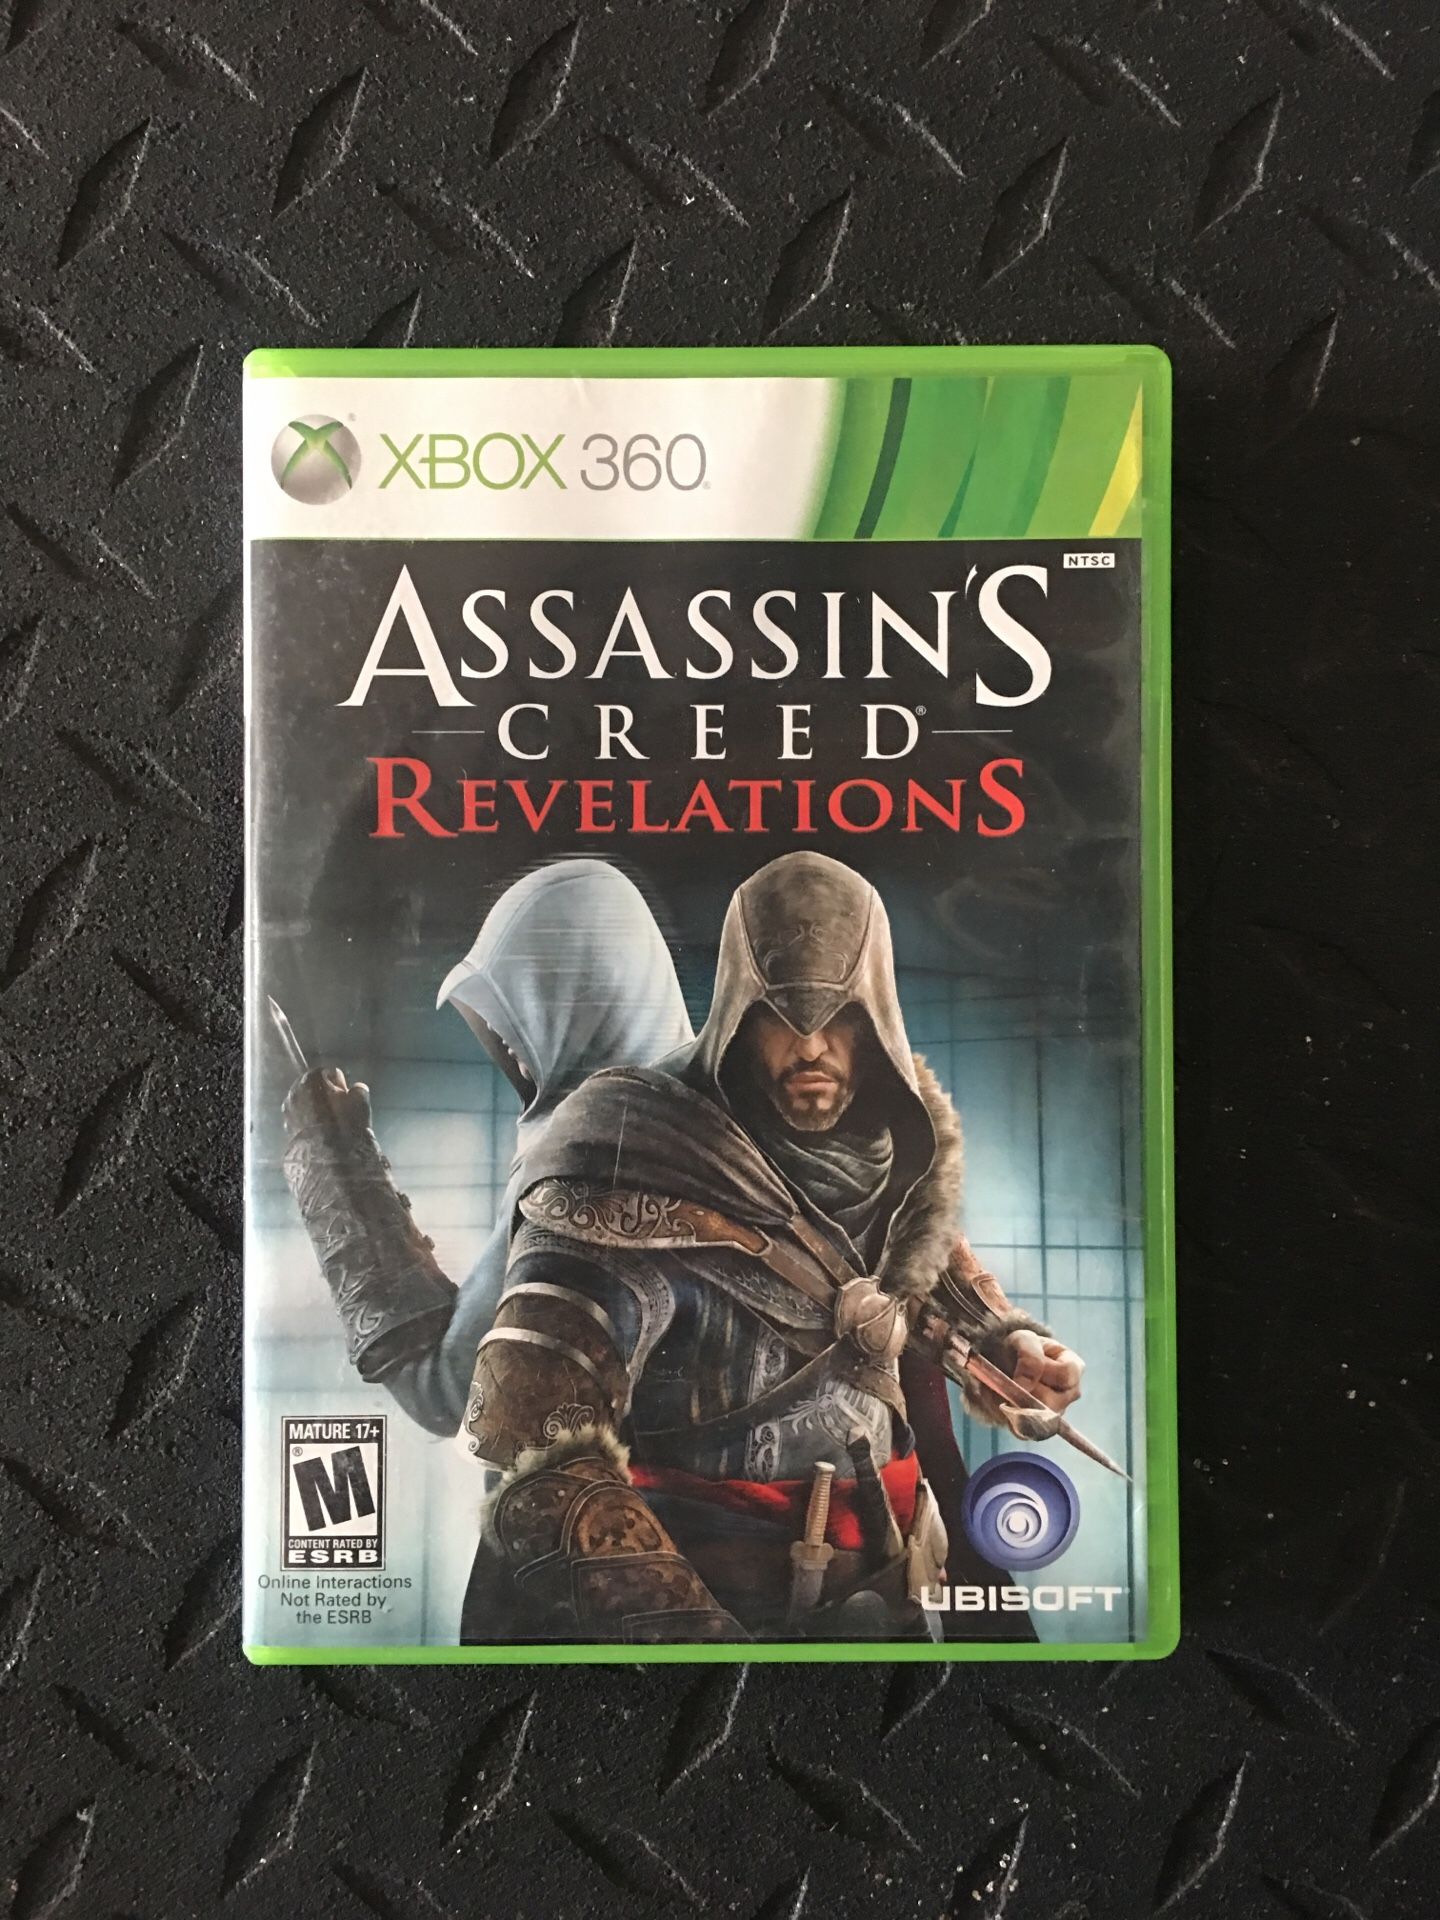 Xbox 360 Game - Assassin’s Creed Revelations